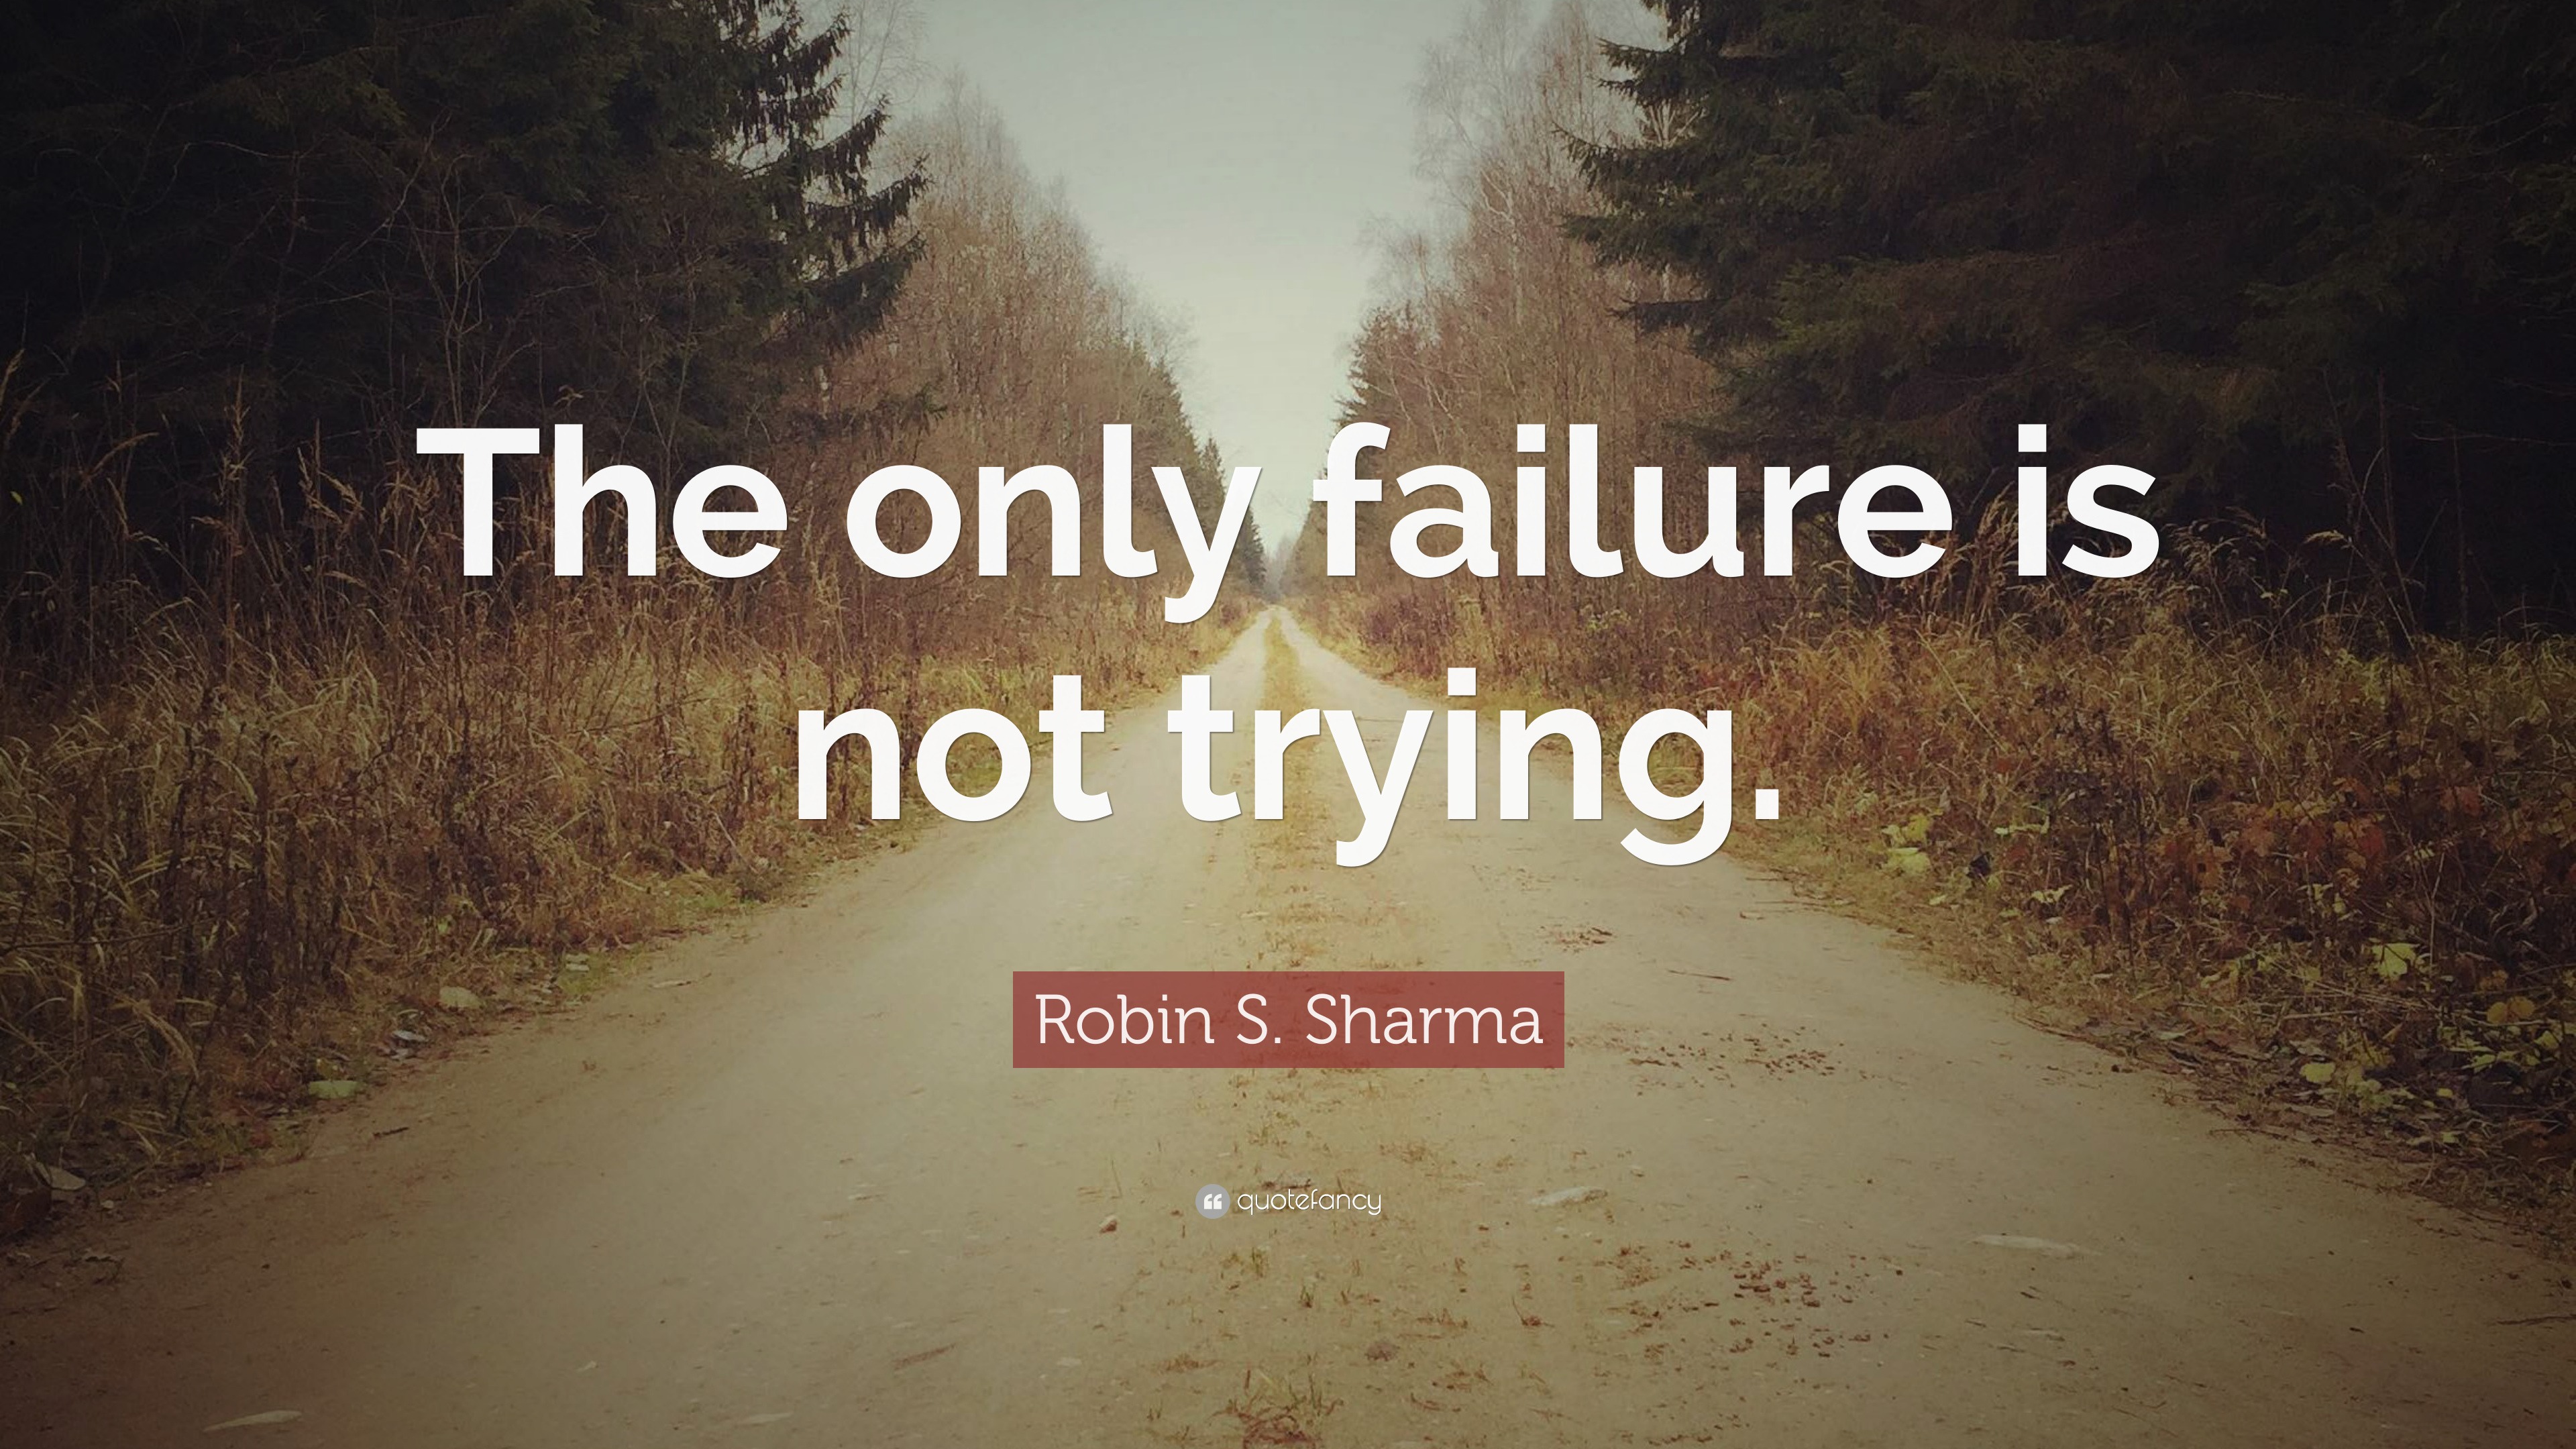 Robin S. Sharma Quote: “The only failure is not trying.”